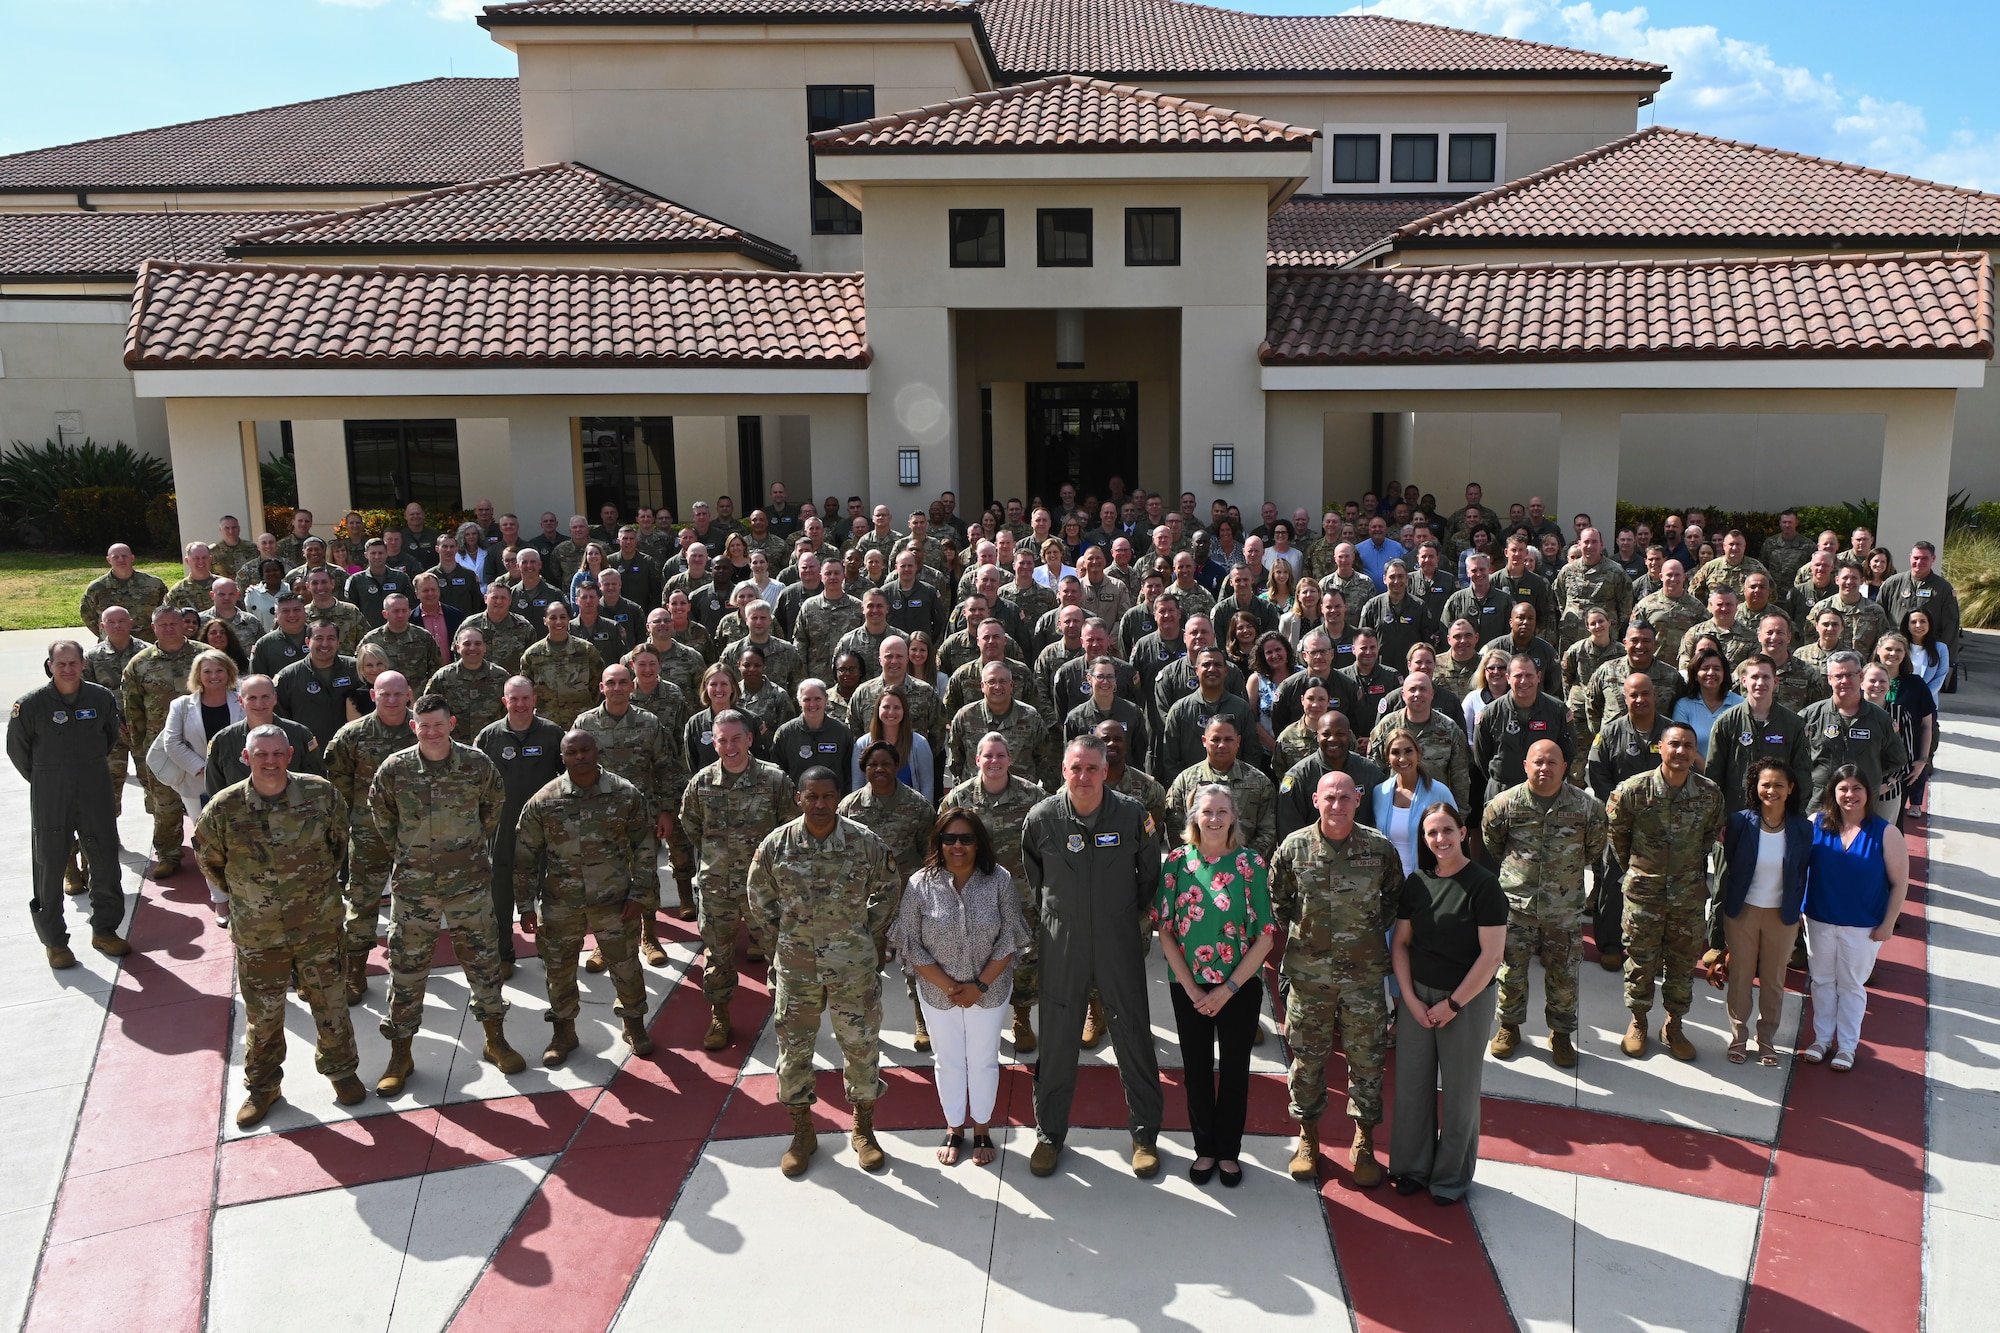 Total Force Mobility Air Force leaders pose for a group photo during Phoenix Rally at MacDill Air Force Base, Florida, April 29, 2024. Spring Phoenix Rally brought together more than 300 Total Force Mobility Air Force leaders and spouses to discuss Warrior Heart, Air Mobility Command's strategy and priorities, and how to work together to ensure the Mobility Air Force is ready to deliver Rapid Global Mobility across the Joint Force. (U.S. Air Force photo by Senior Airman Jessica Do)